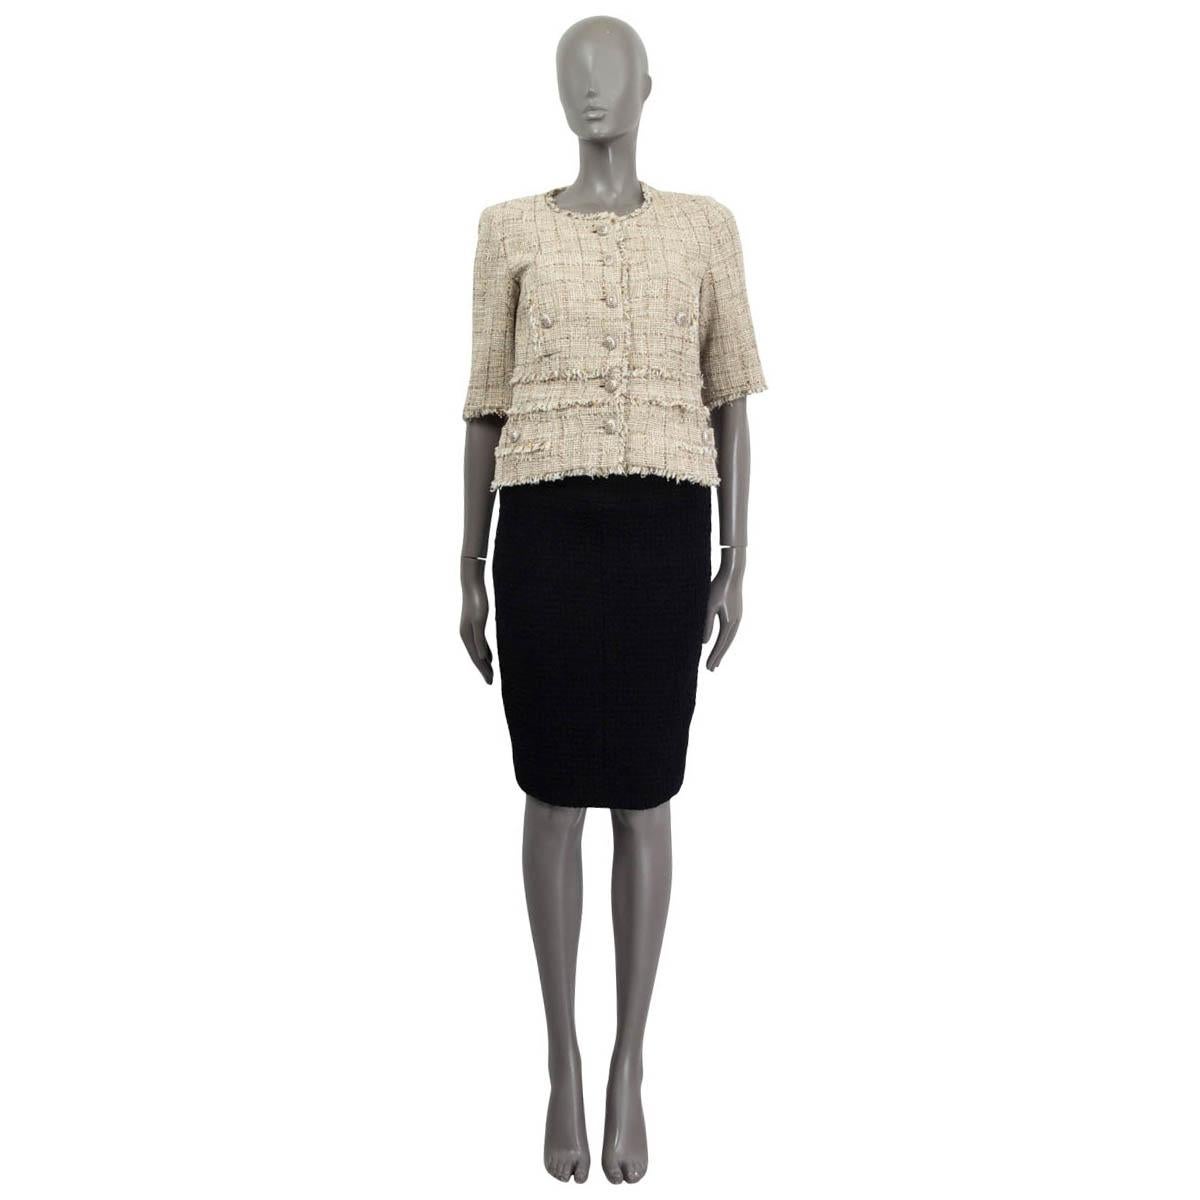 100% authentic Chanel tweed 3/4 sleeve jacket in beige, ecru, white, gold and silver cotton (52%), acrylic (21%), polyester (13%), rayon (6%), nylon (4%) and wool (4%). Embellished with small fringes around the neck, the hemline, buttoned pockets